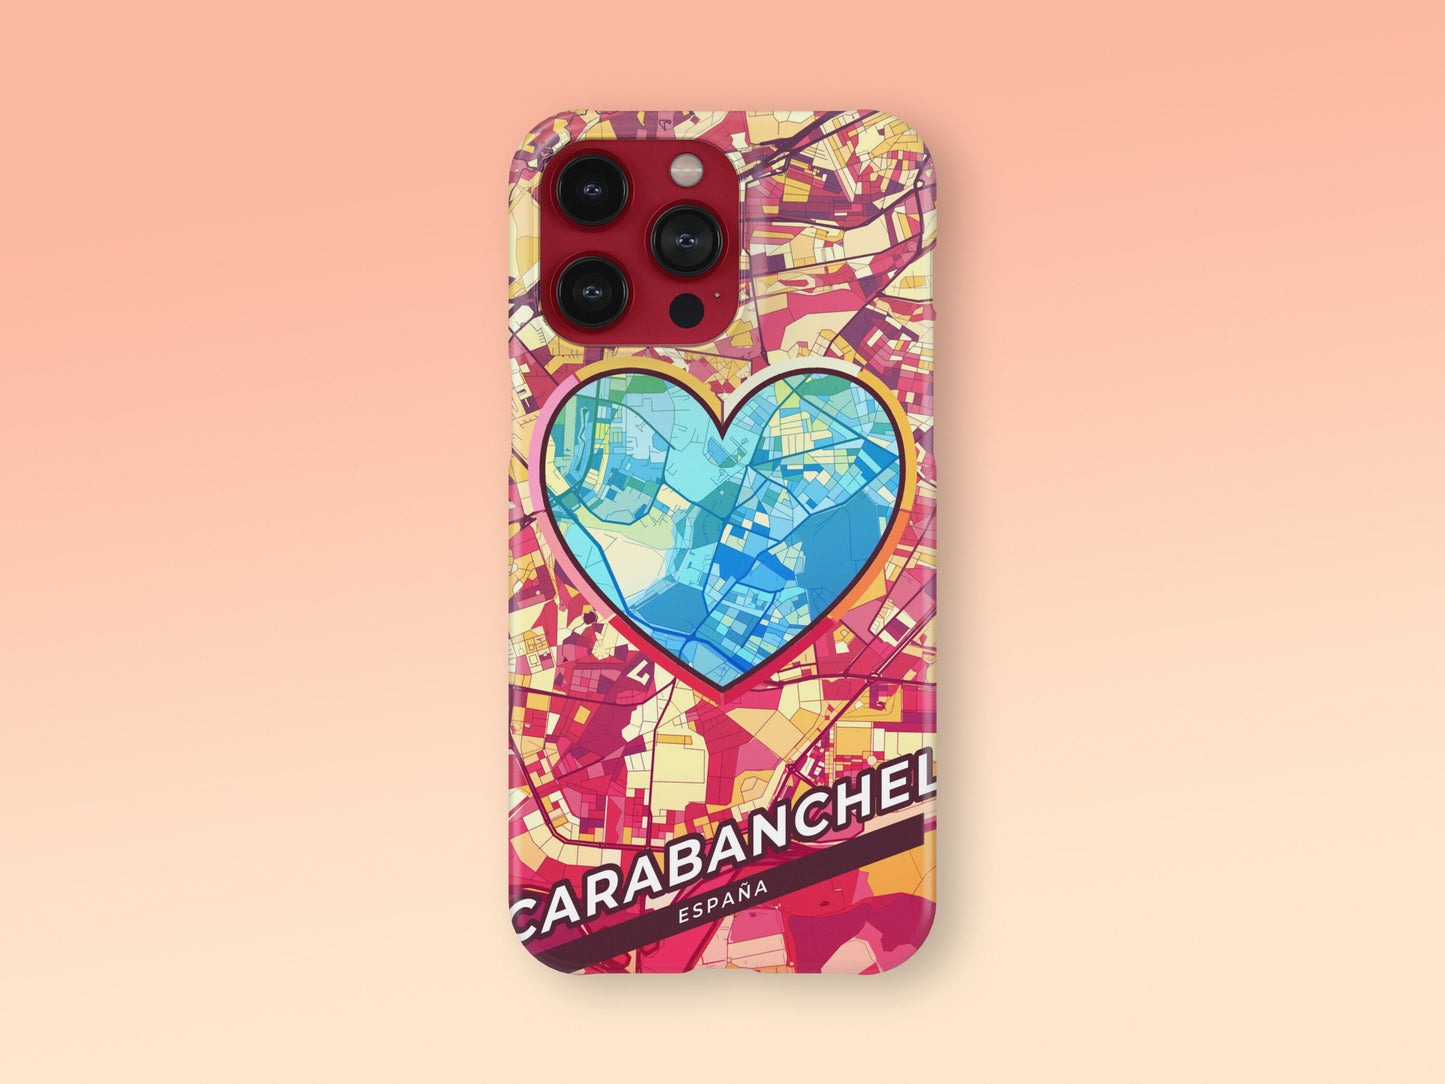 Carabanchel Spain slim phone case with colorful icon. Birthday, wedding or housewarming gift. Couple match cases. 2